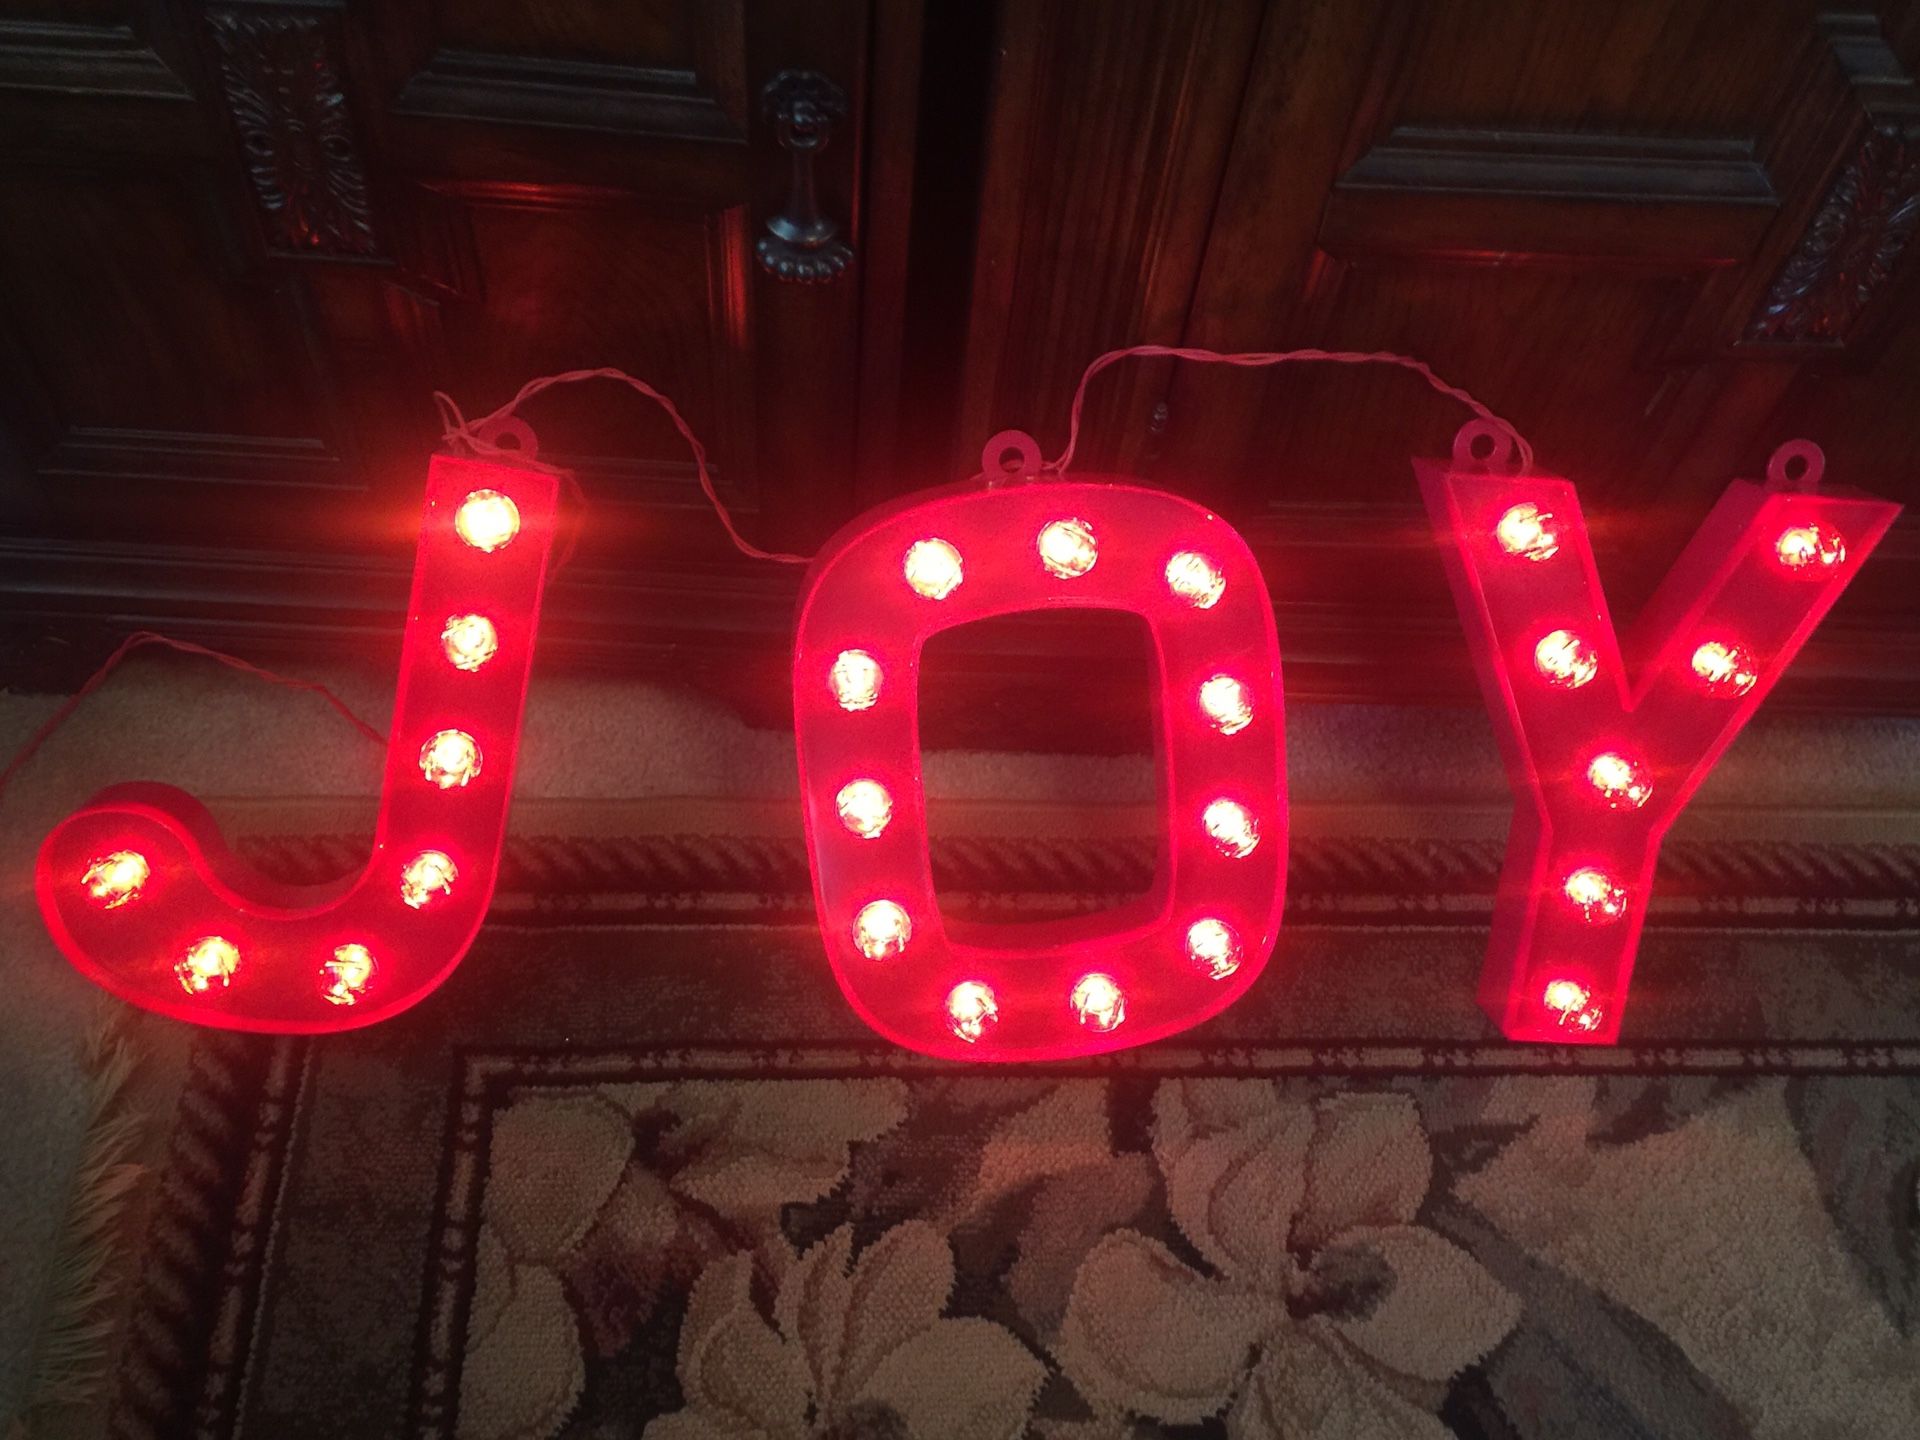 Word “Joy” in Red LED Light Christmas Holiday 10 x 13 inches